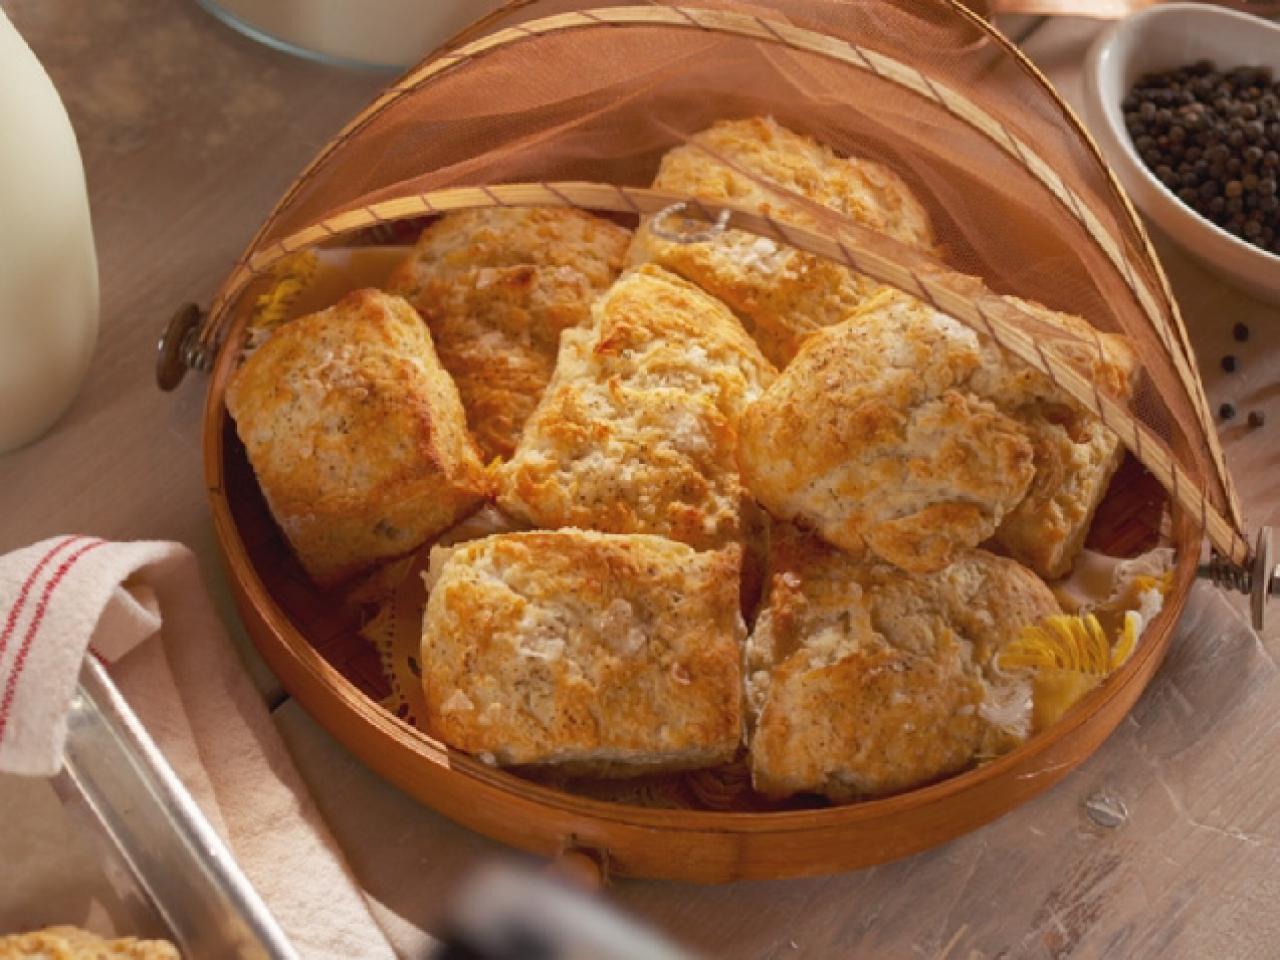 https://food.fnr.sndimg.com/content/dam/images/food/fullset/2015/7/26/0/RF0504H_Salt-and-Pepper-Biscuits-with-Bacon-Butter_s4x3.jpg.rend.hgtvcom.1280.960.suffix/1440105428901.jpeg